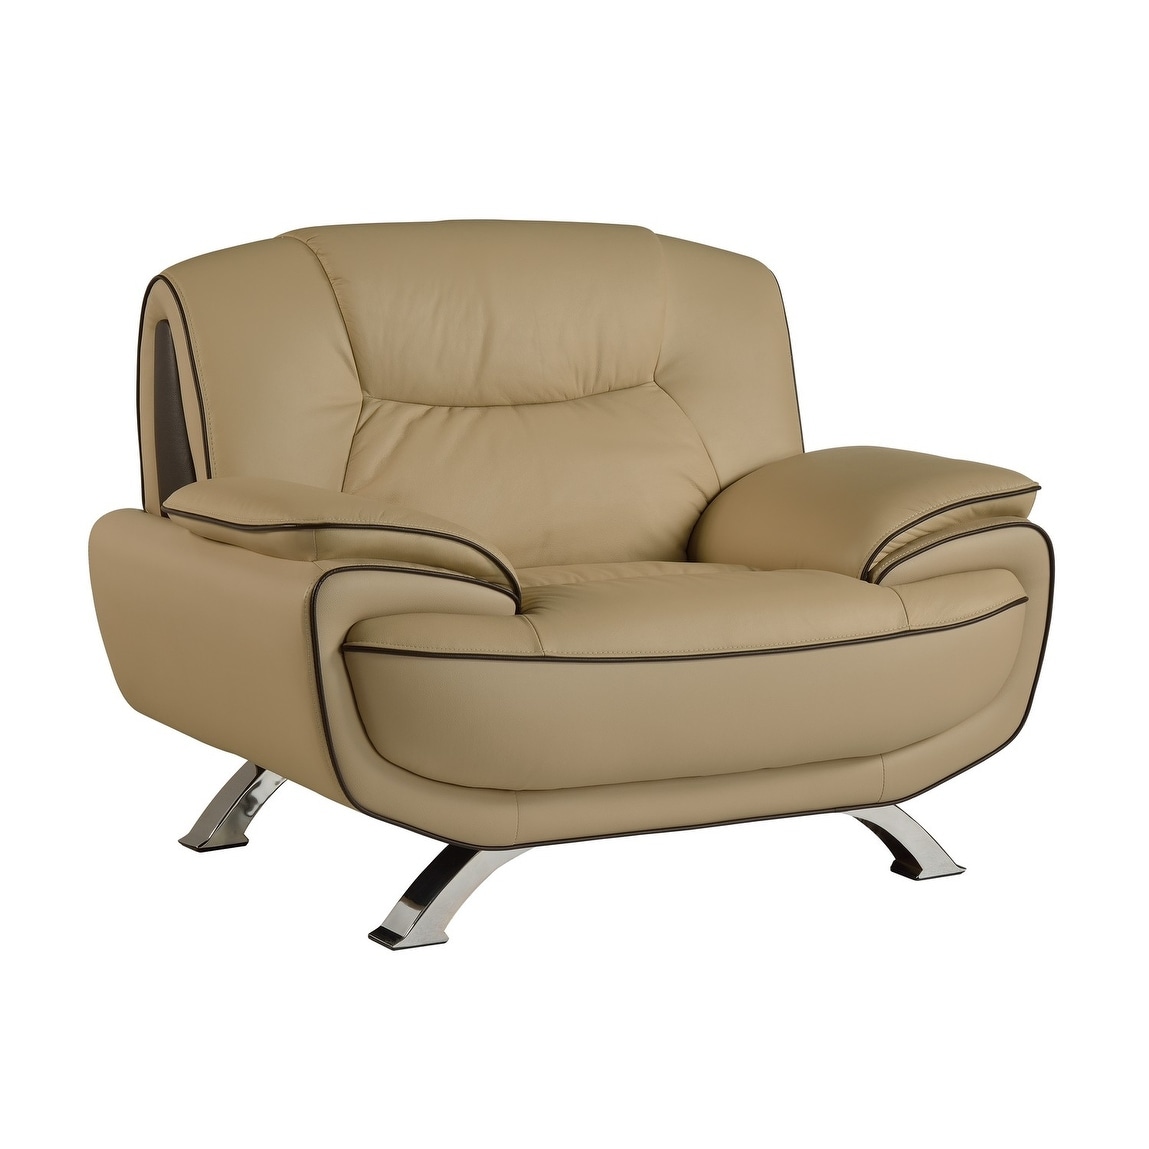 https://ak1.ostkcdn.com/images/products/is/images/direct/1023ea5b8a987042a050e9e2ff8fe3d3ef41ff2e/40%22-Beige-Sleek-Leather-Recliner-Chair.jpg